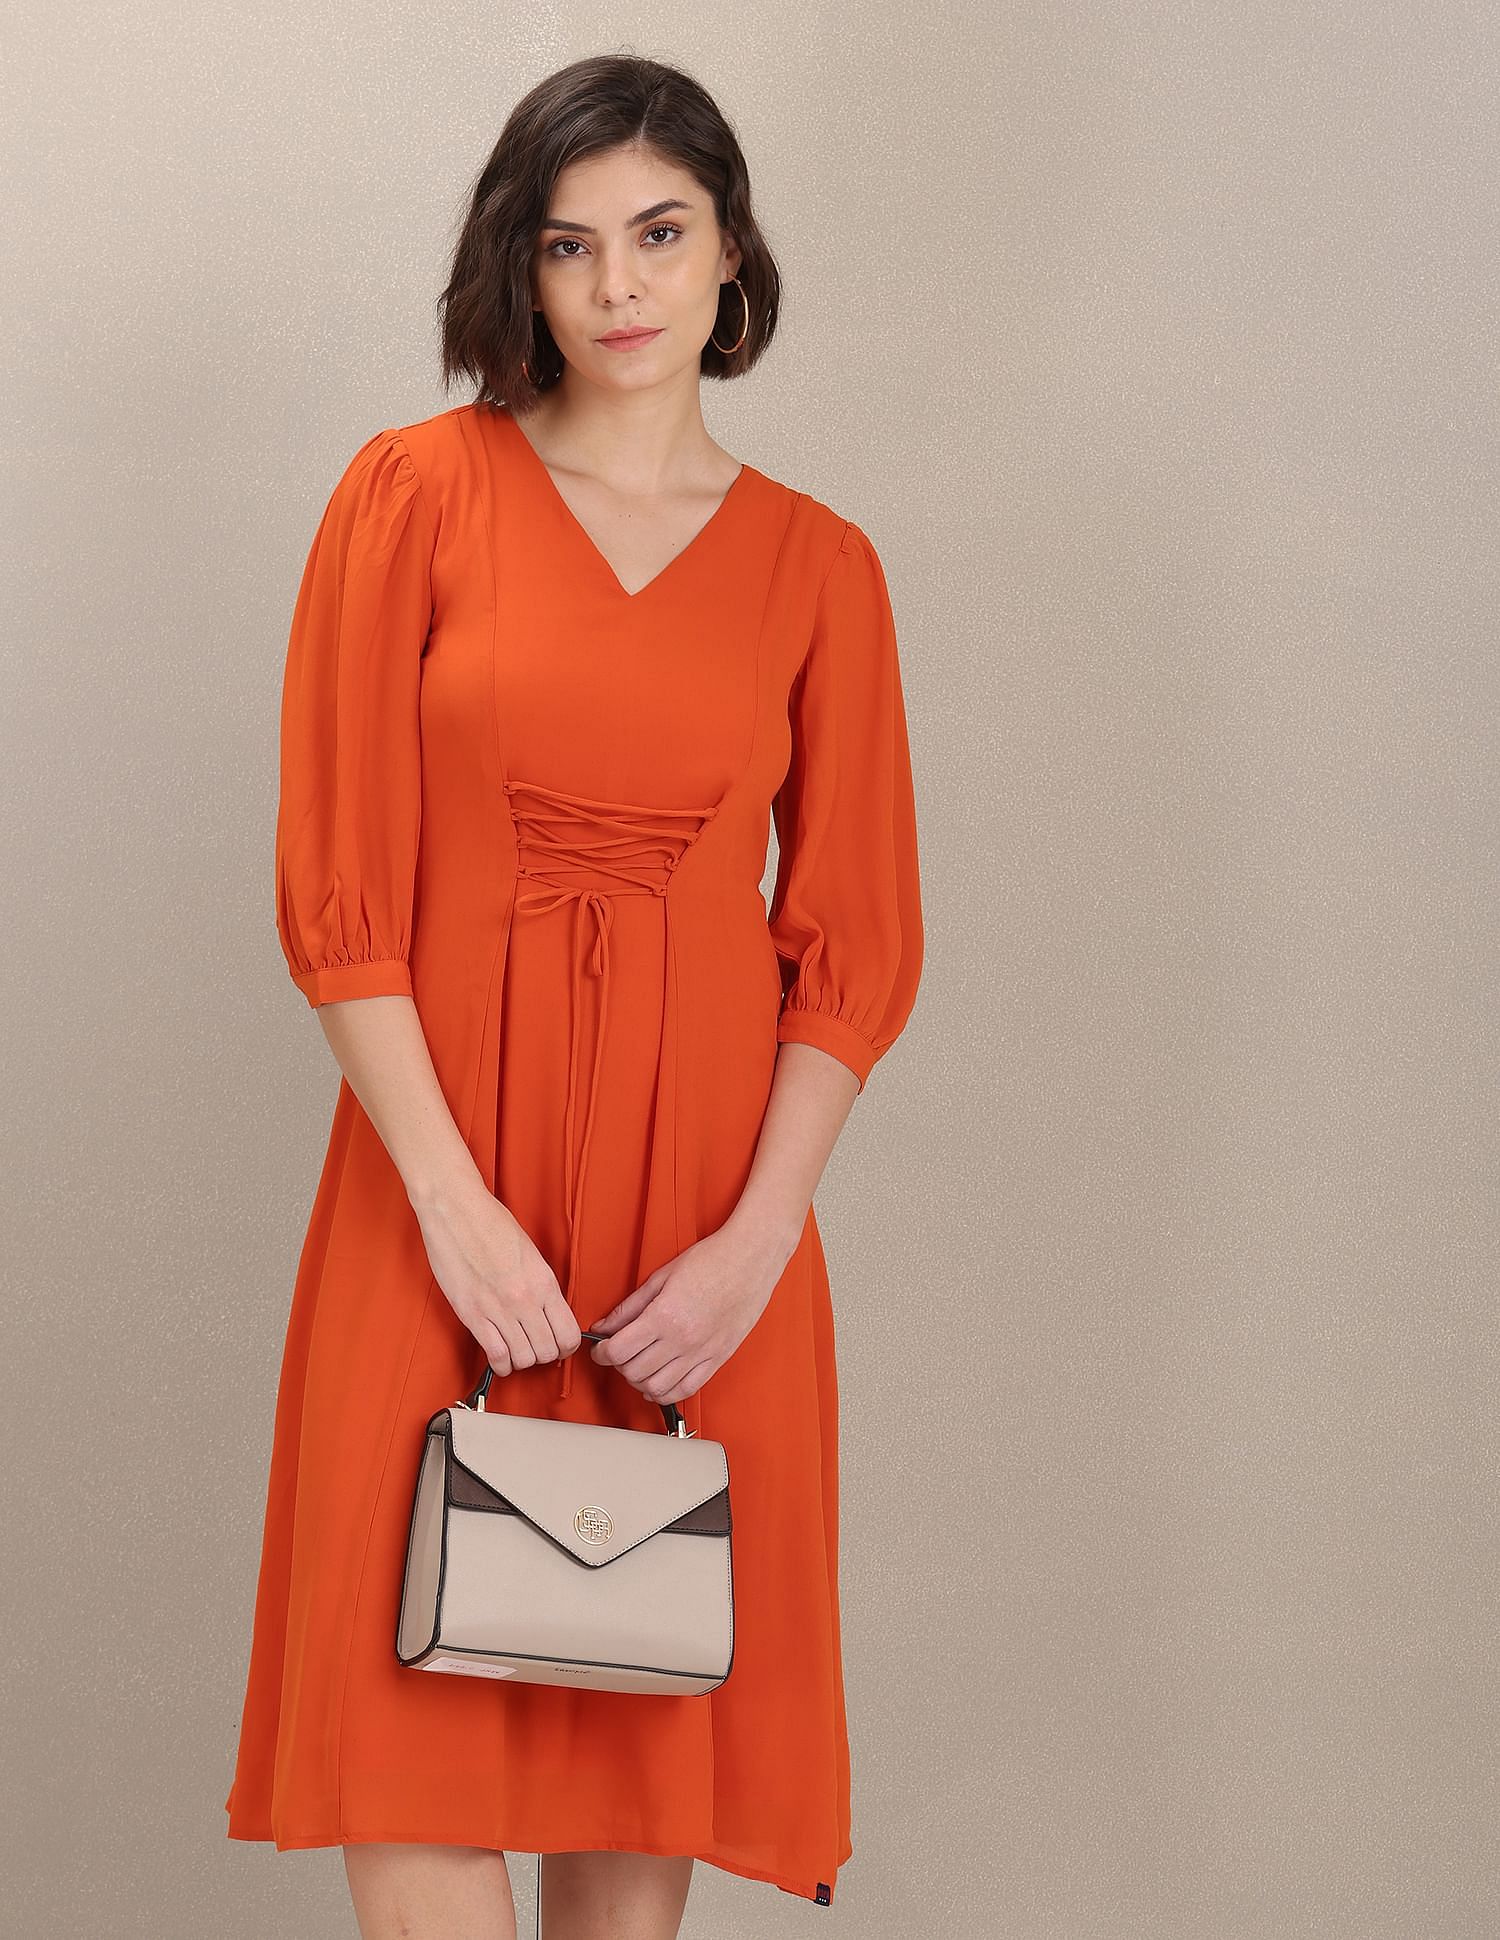 Hot Spring Autumn European Simple Three Quarter Sleeve Ladys Elegant Causal  Dress OL Party Dresses Women Red Dress From Jewelrytrend, $21.51 |  DHgate.Com